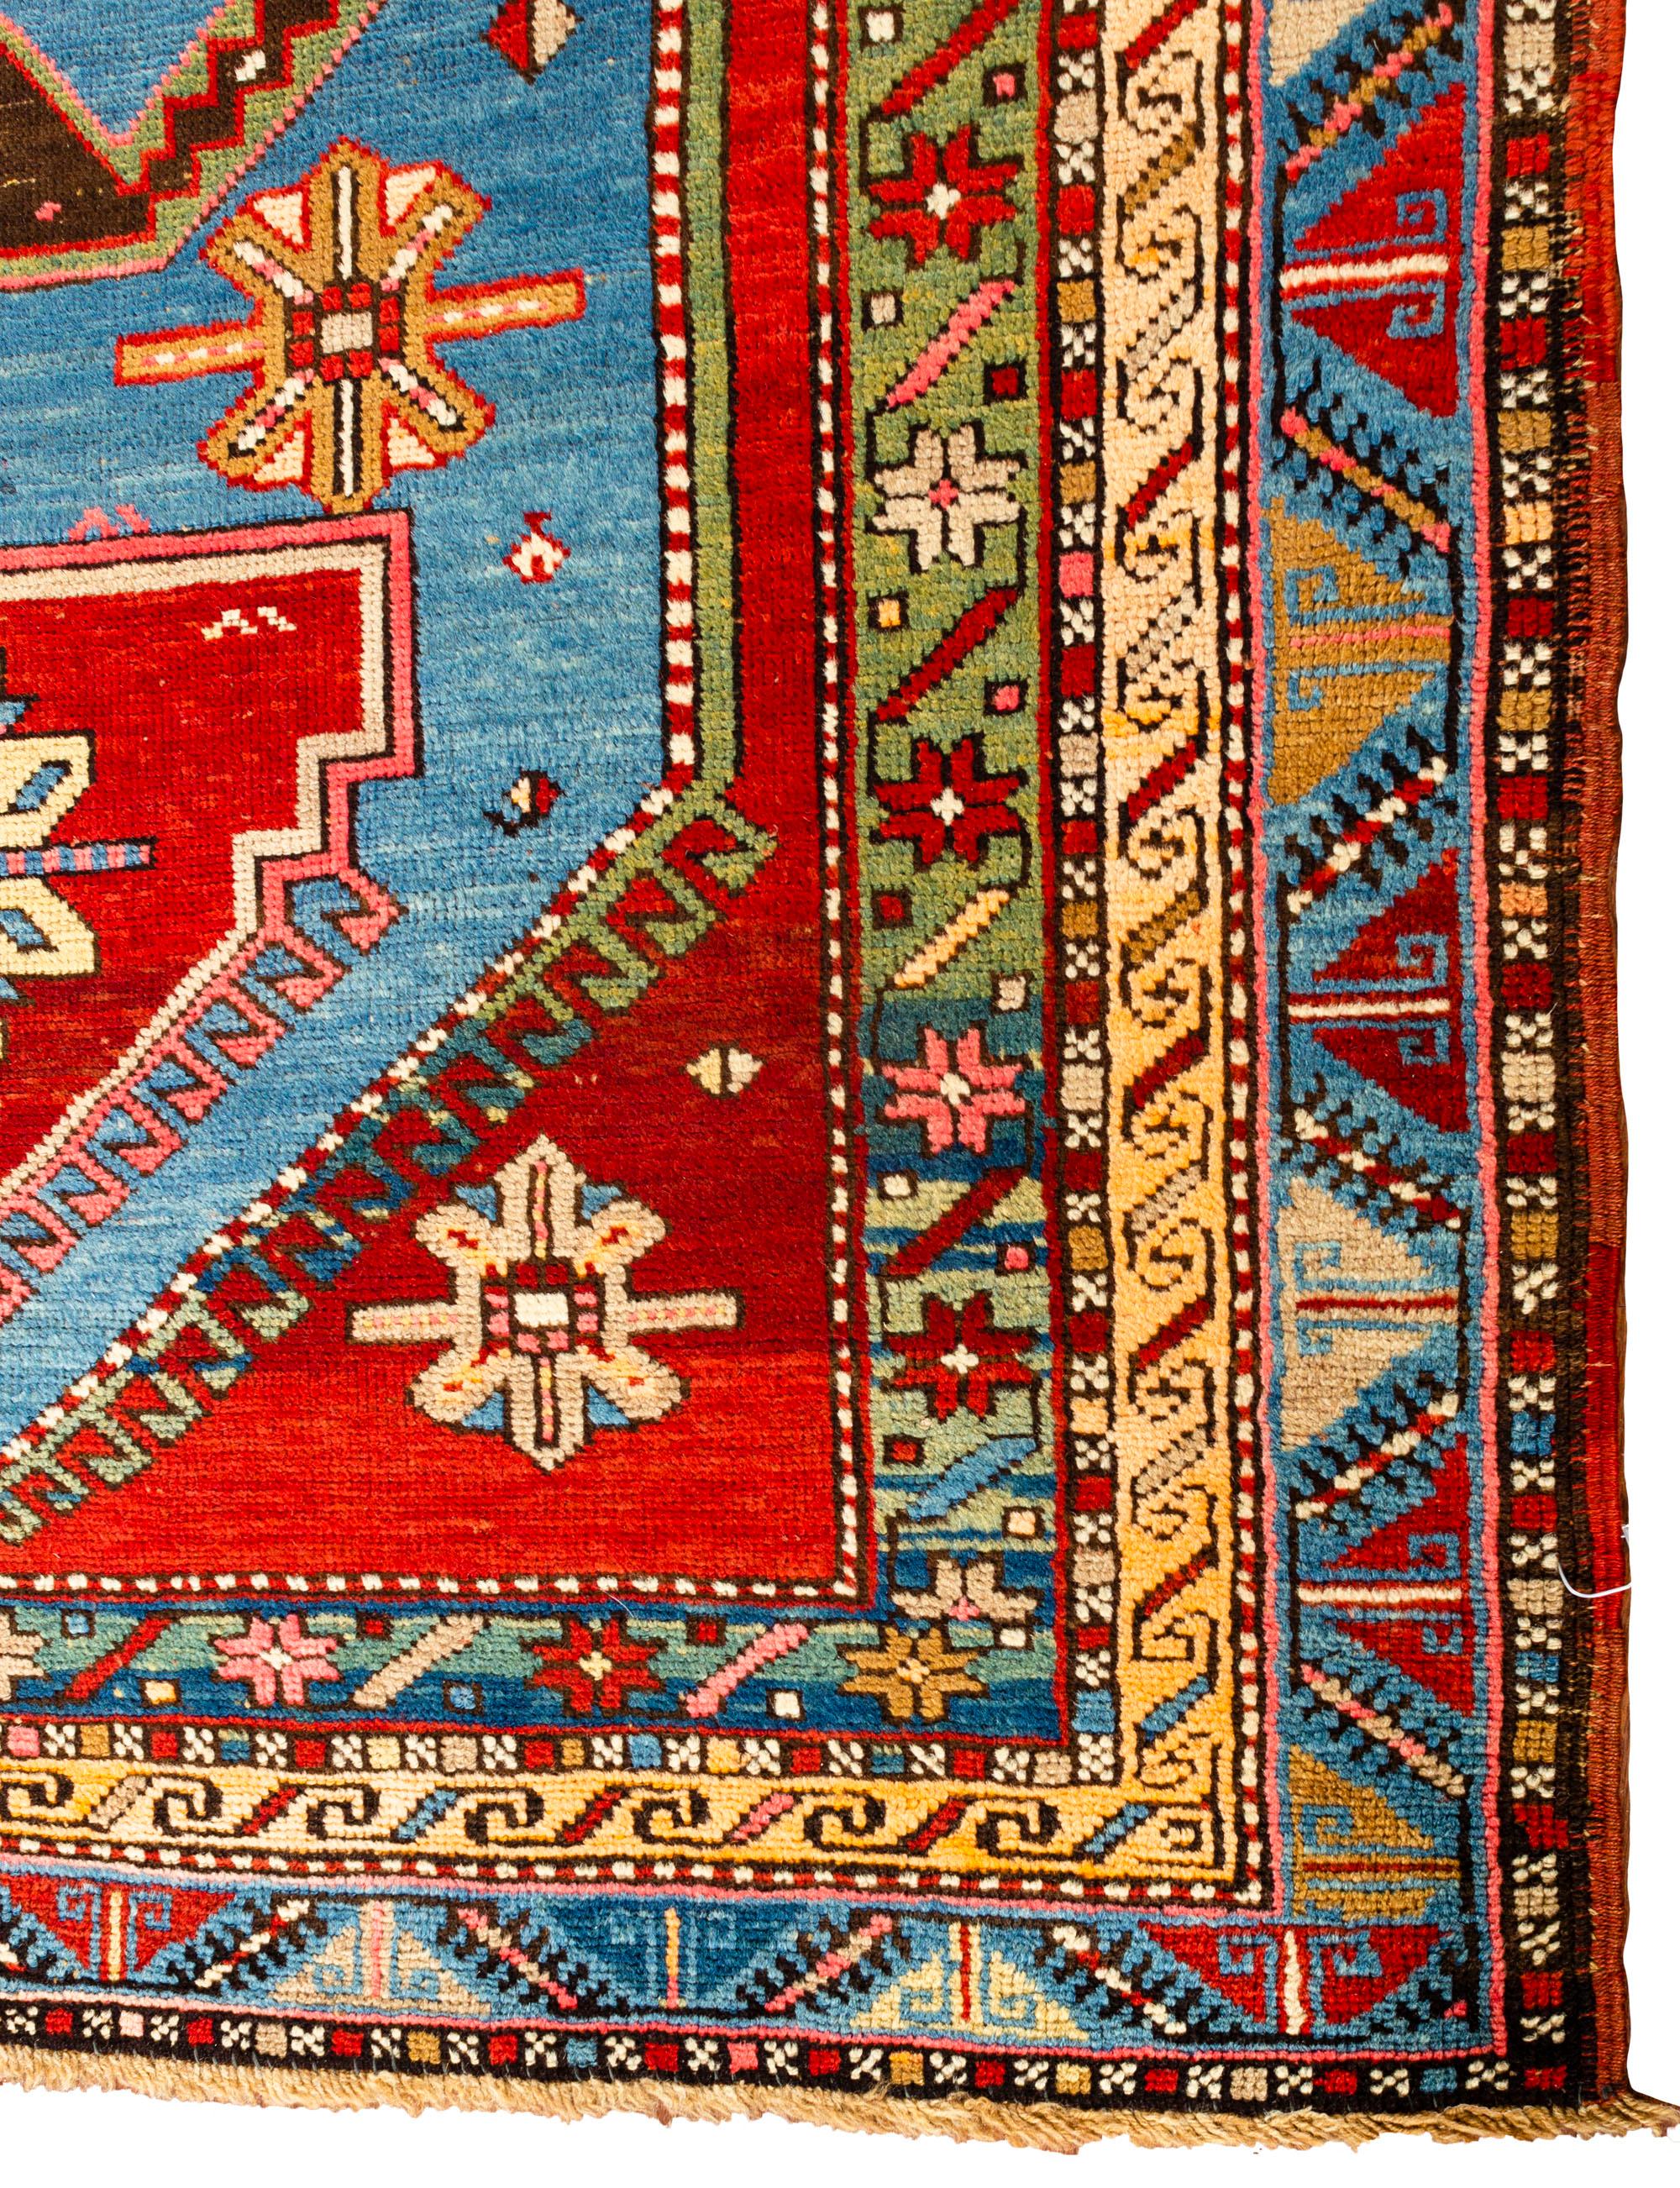 A south west Caucasian Kazak handwoven rug circa 1880, with bold and vibrant colors, that create a true sense of beauty, to this tribal rug. The Caucasus Mountains, between Persia and Russia are justly famous for their colorful, geometric antique